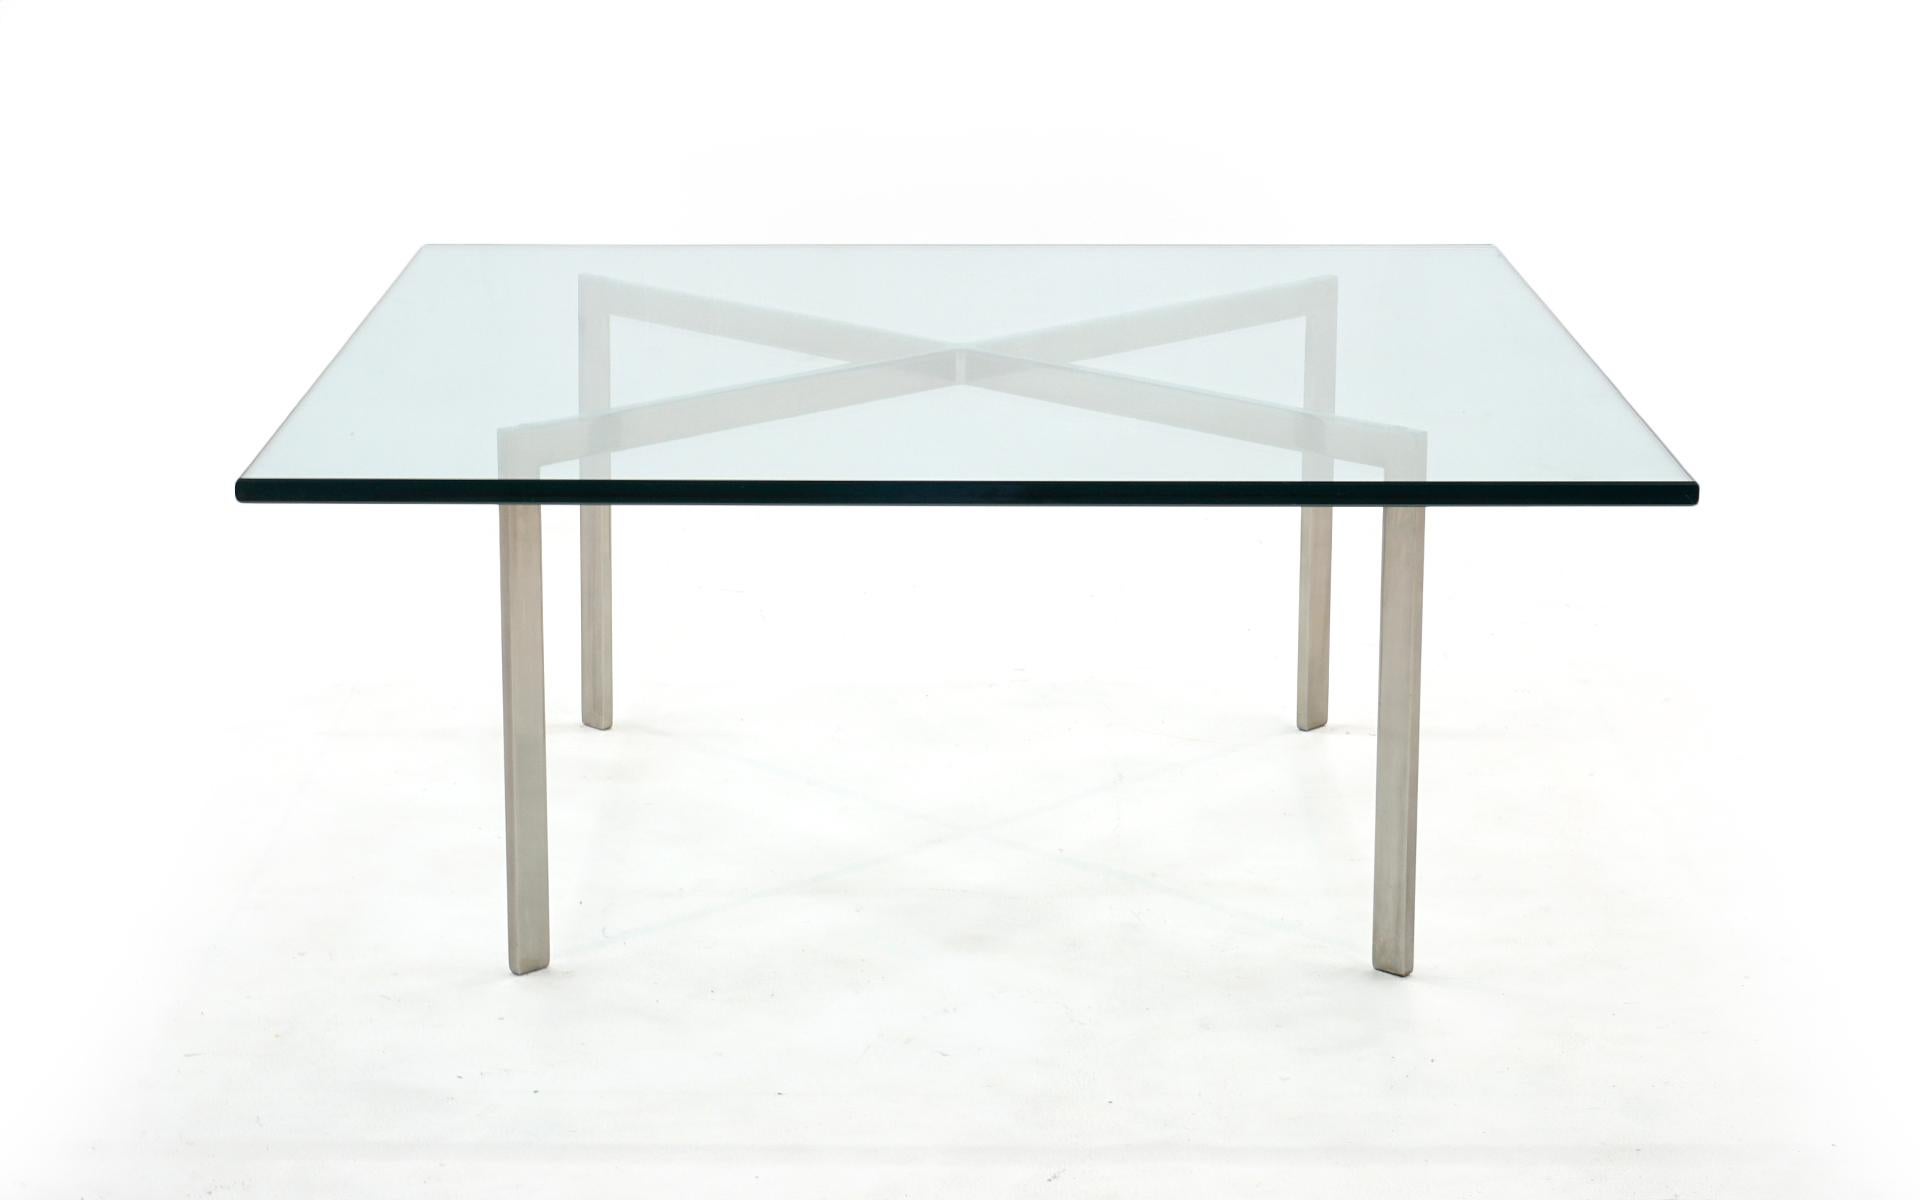 Early 1960s Ludwig Mies van der Rohe Barcelona coffee table. Solid stainless steel frame with the original glass top. No chips, cracks or repairs. No significant scratches. This is the best early example of this iconic table to come through our